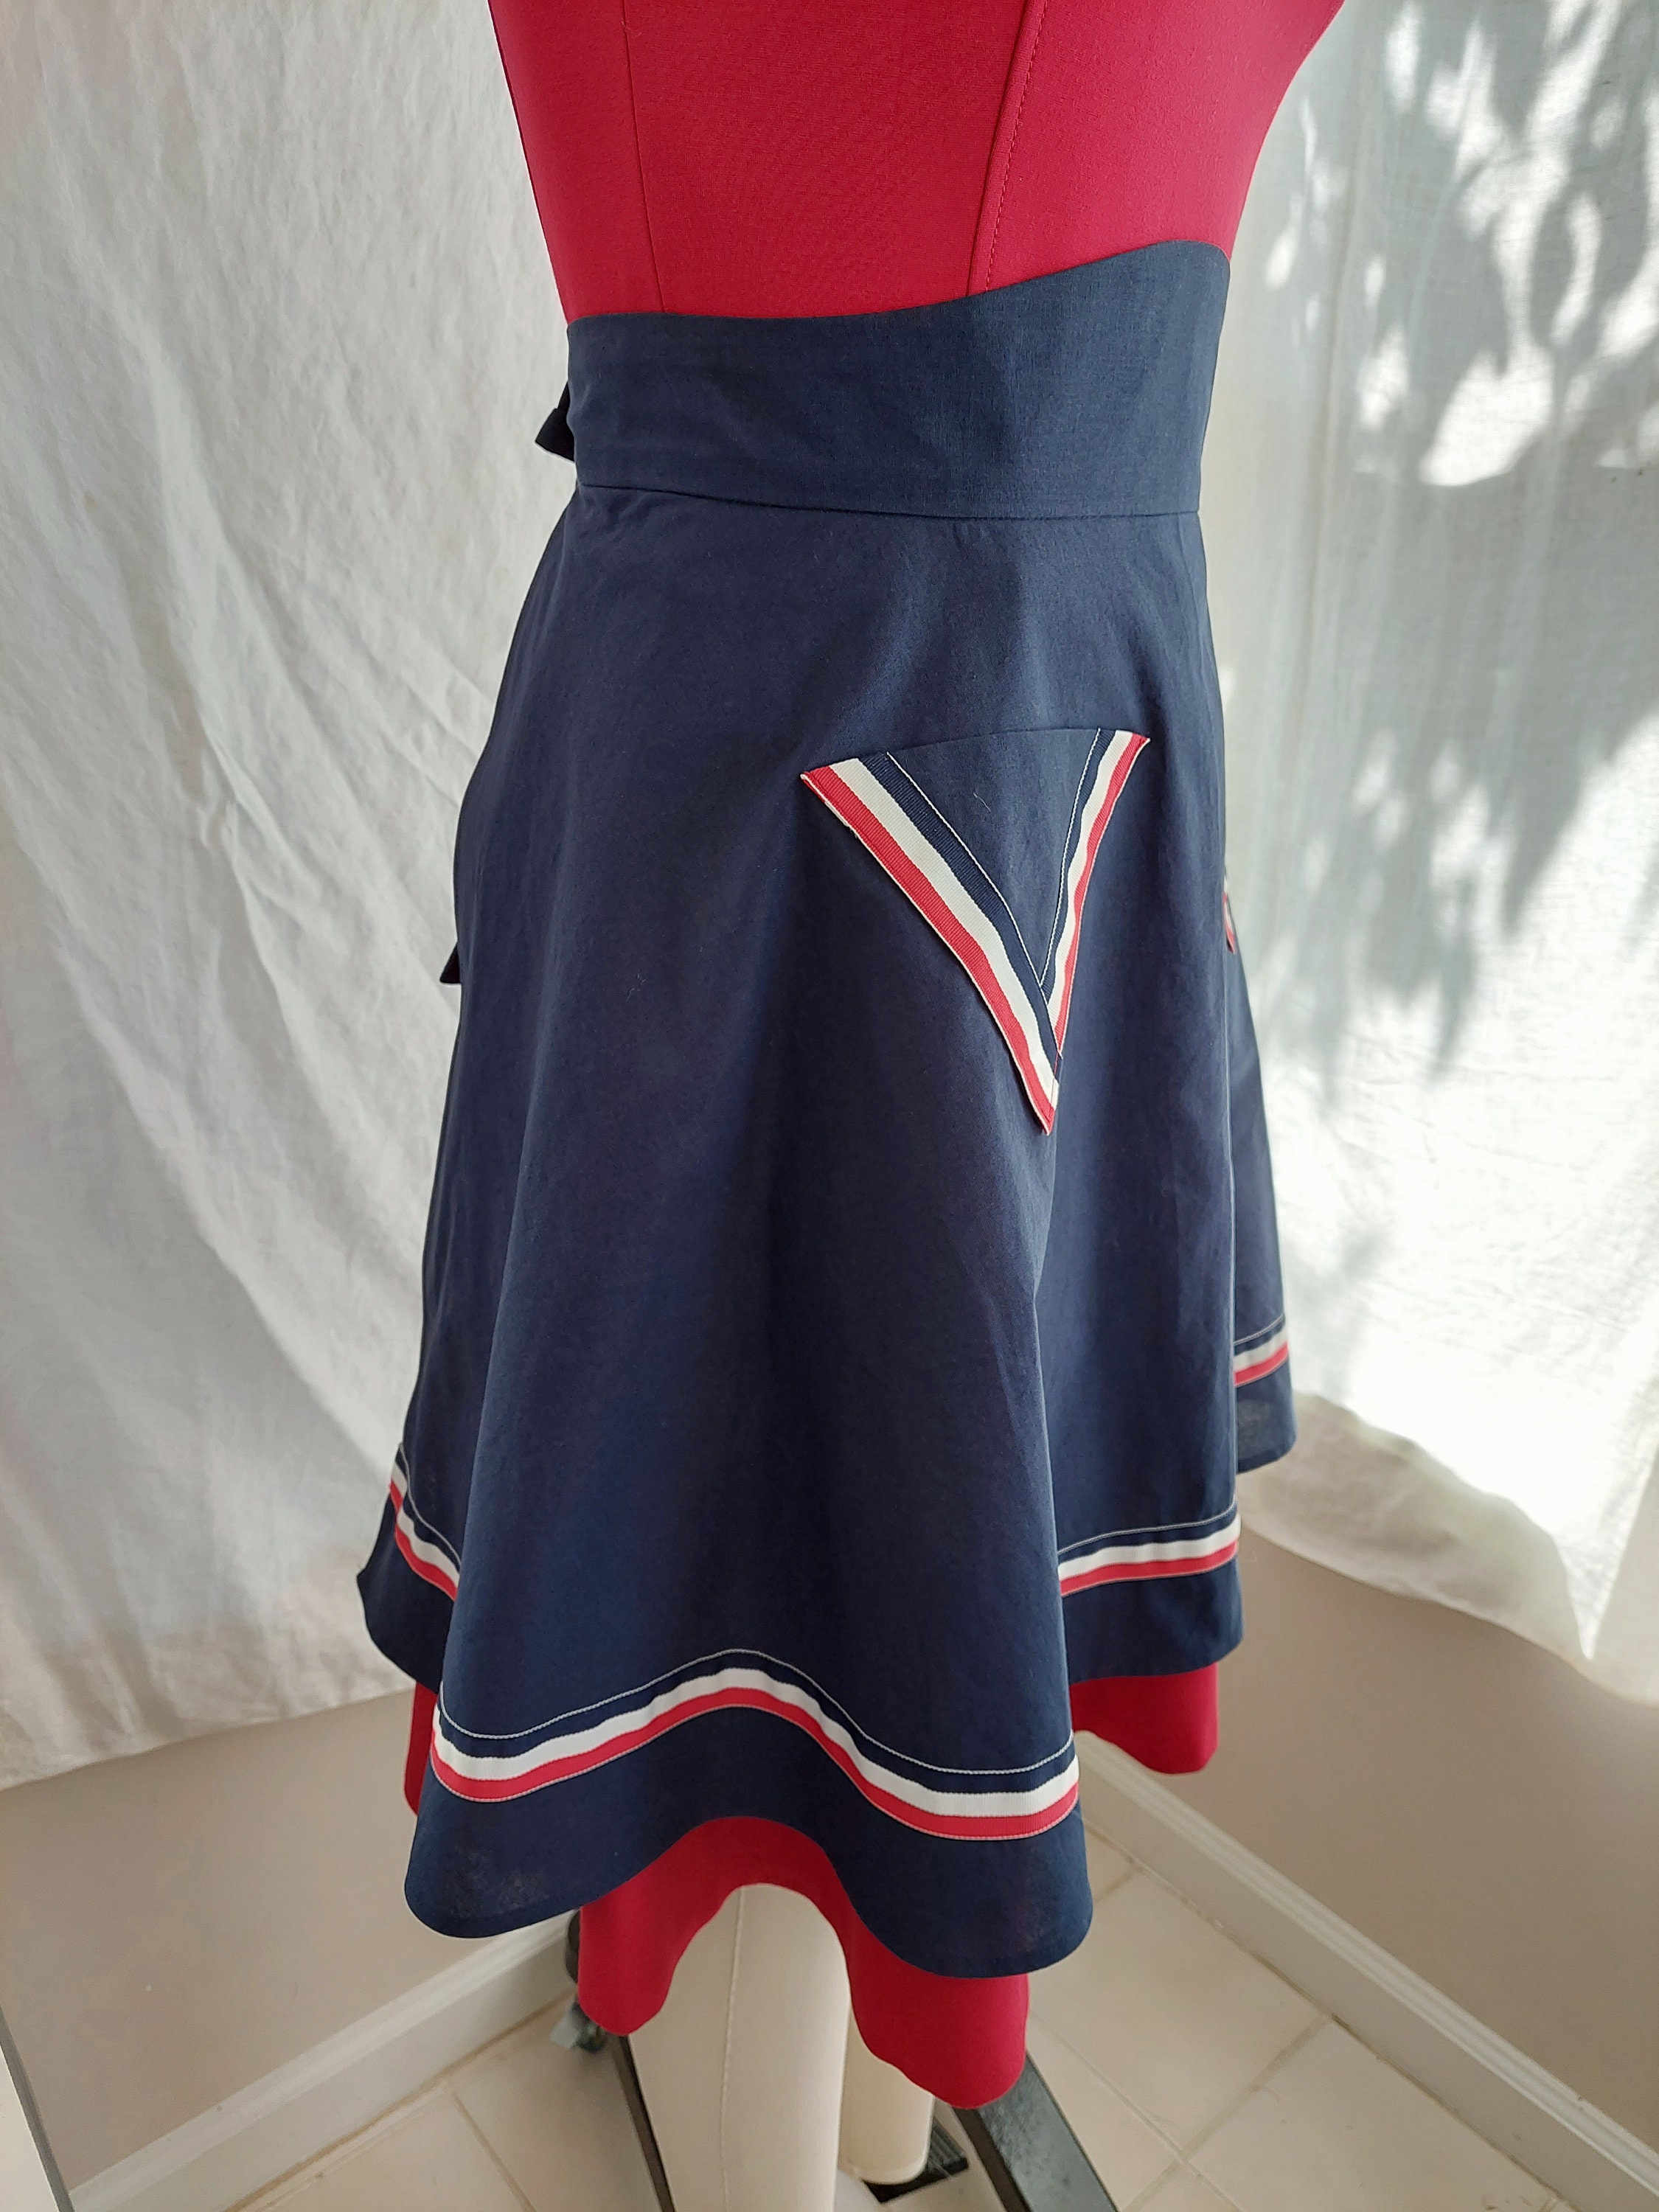 Vintage 1940s Style Apron, Reproduction WWII Victory Apron, Retro ...